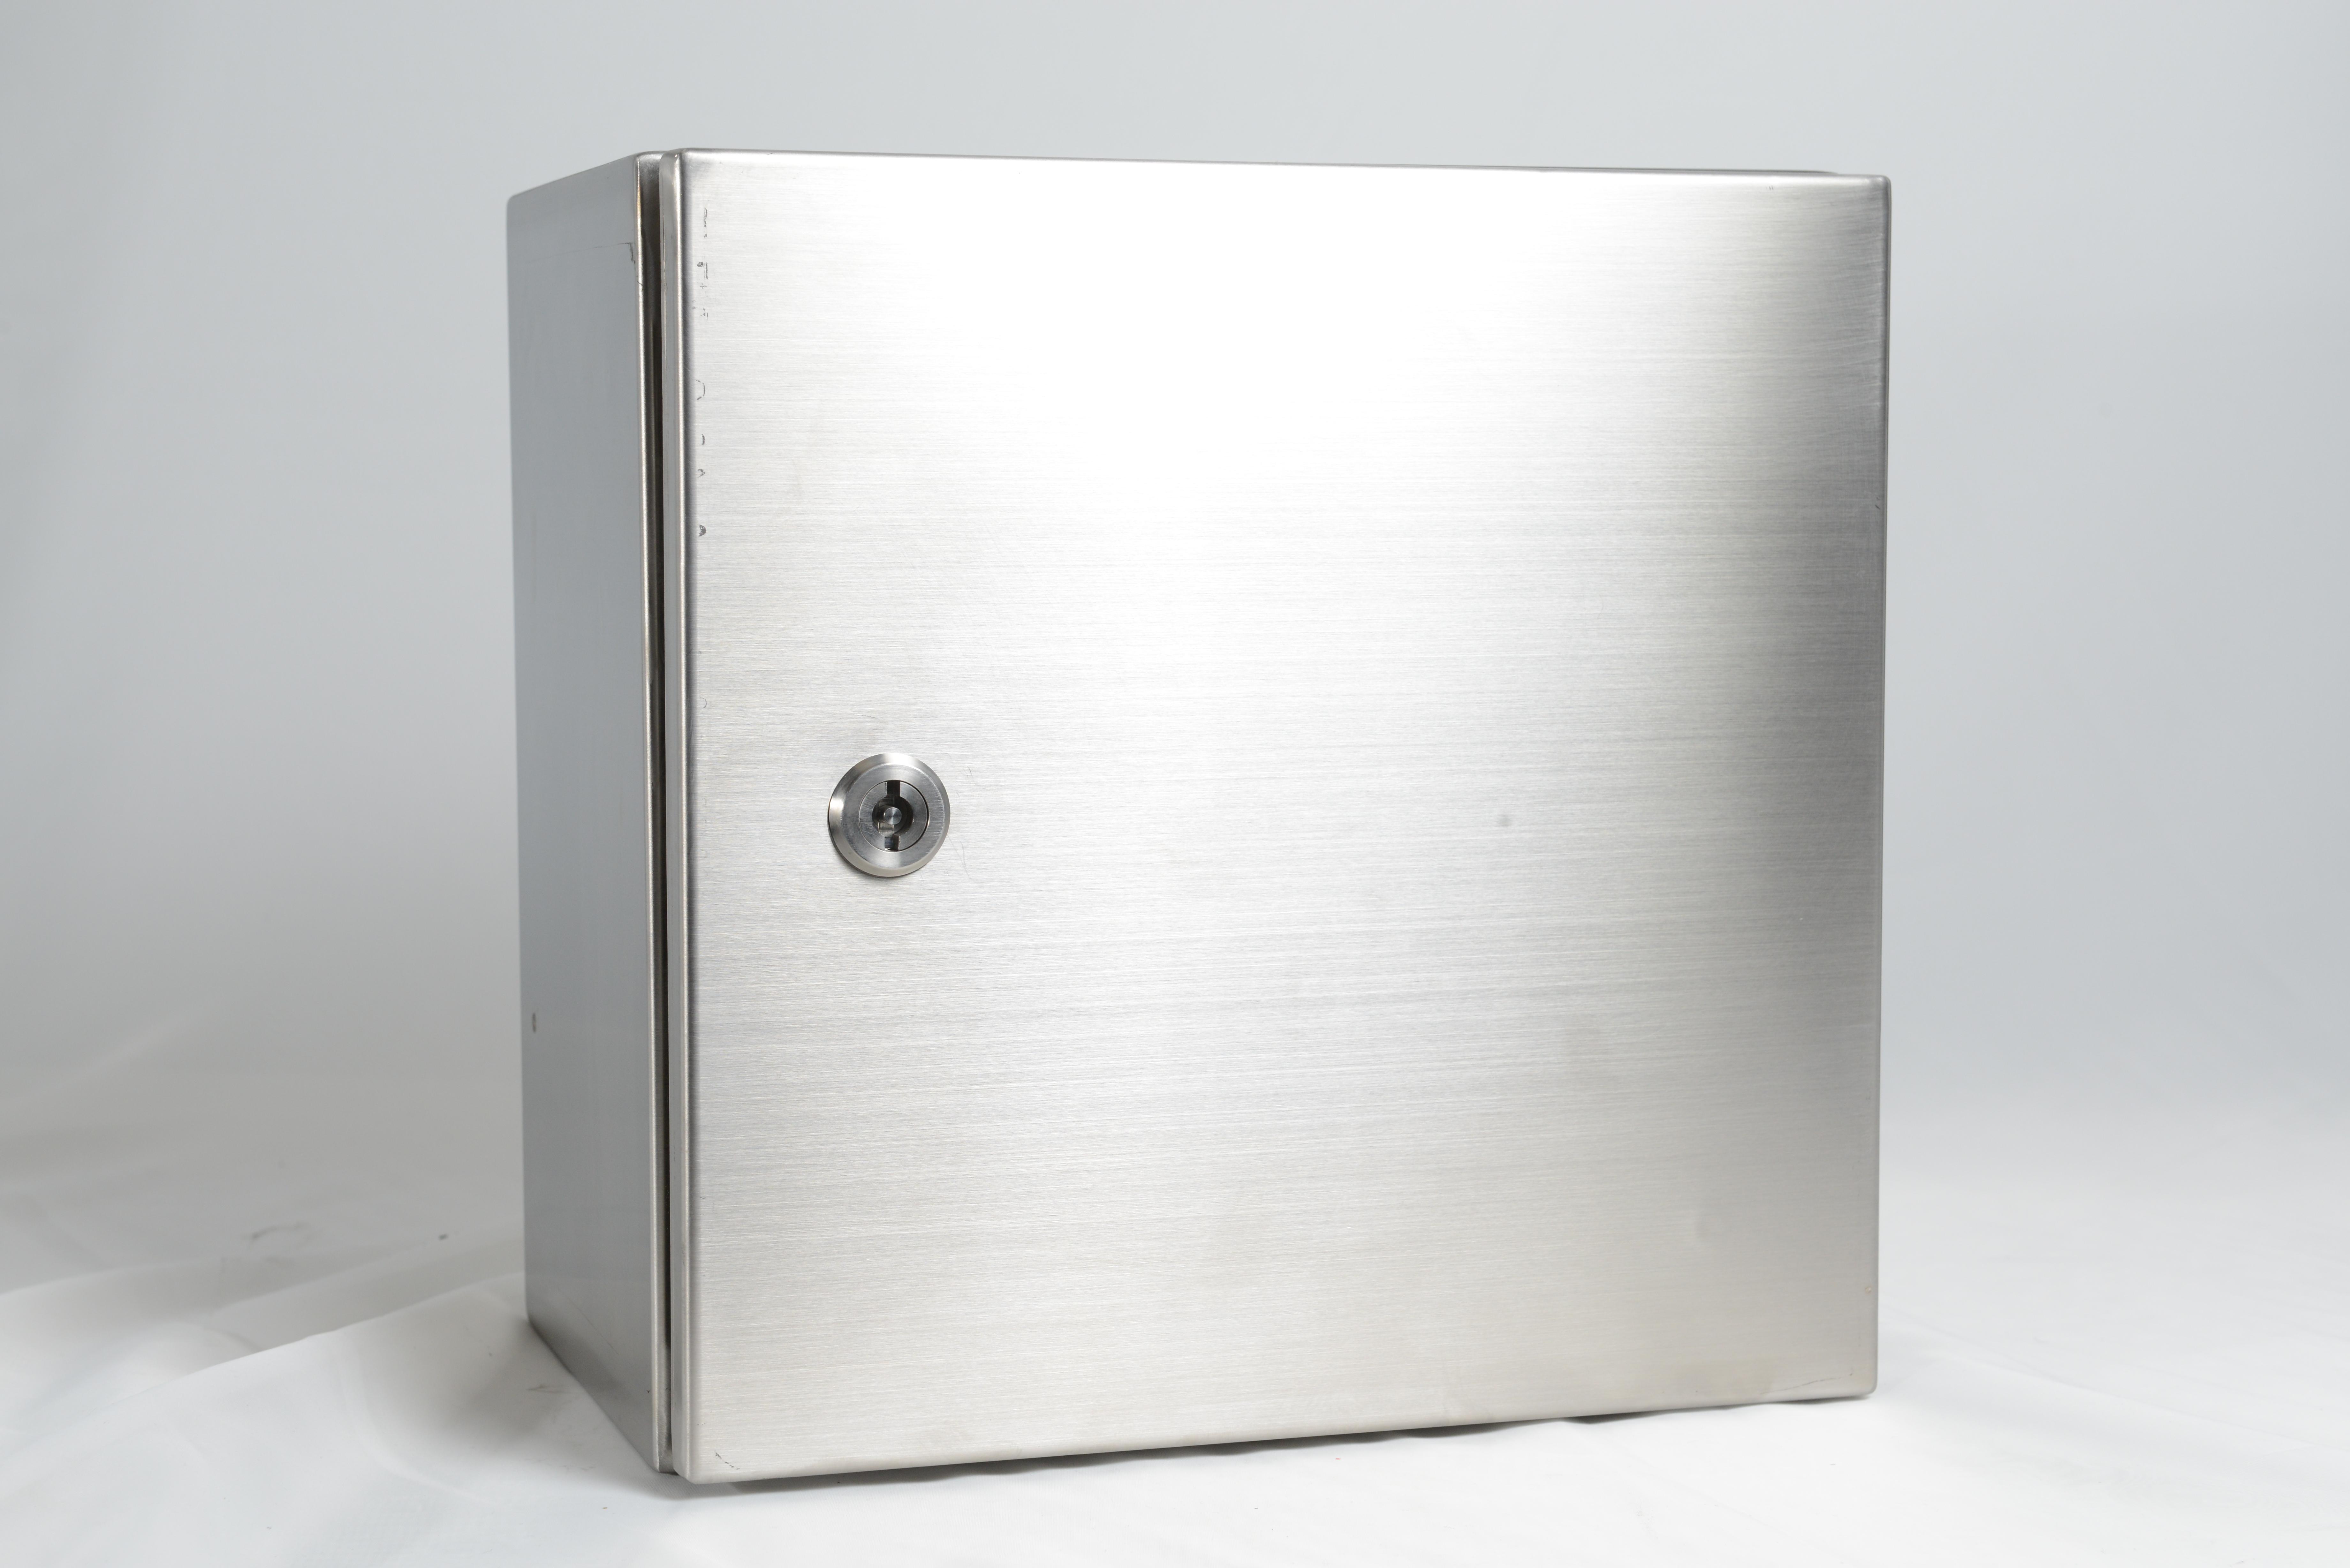 RCG stainless steel enclosure 316 grade 600x400x250mm - wall mounting